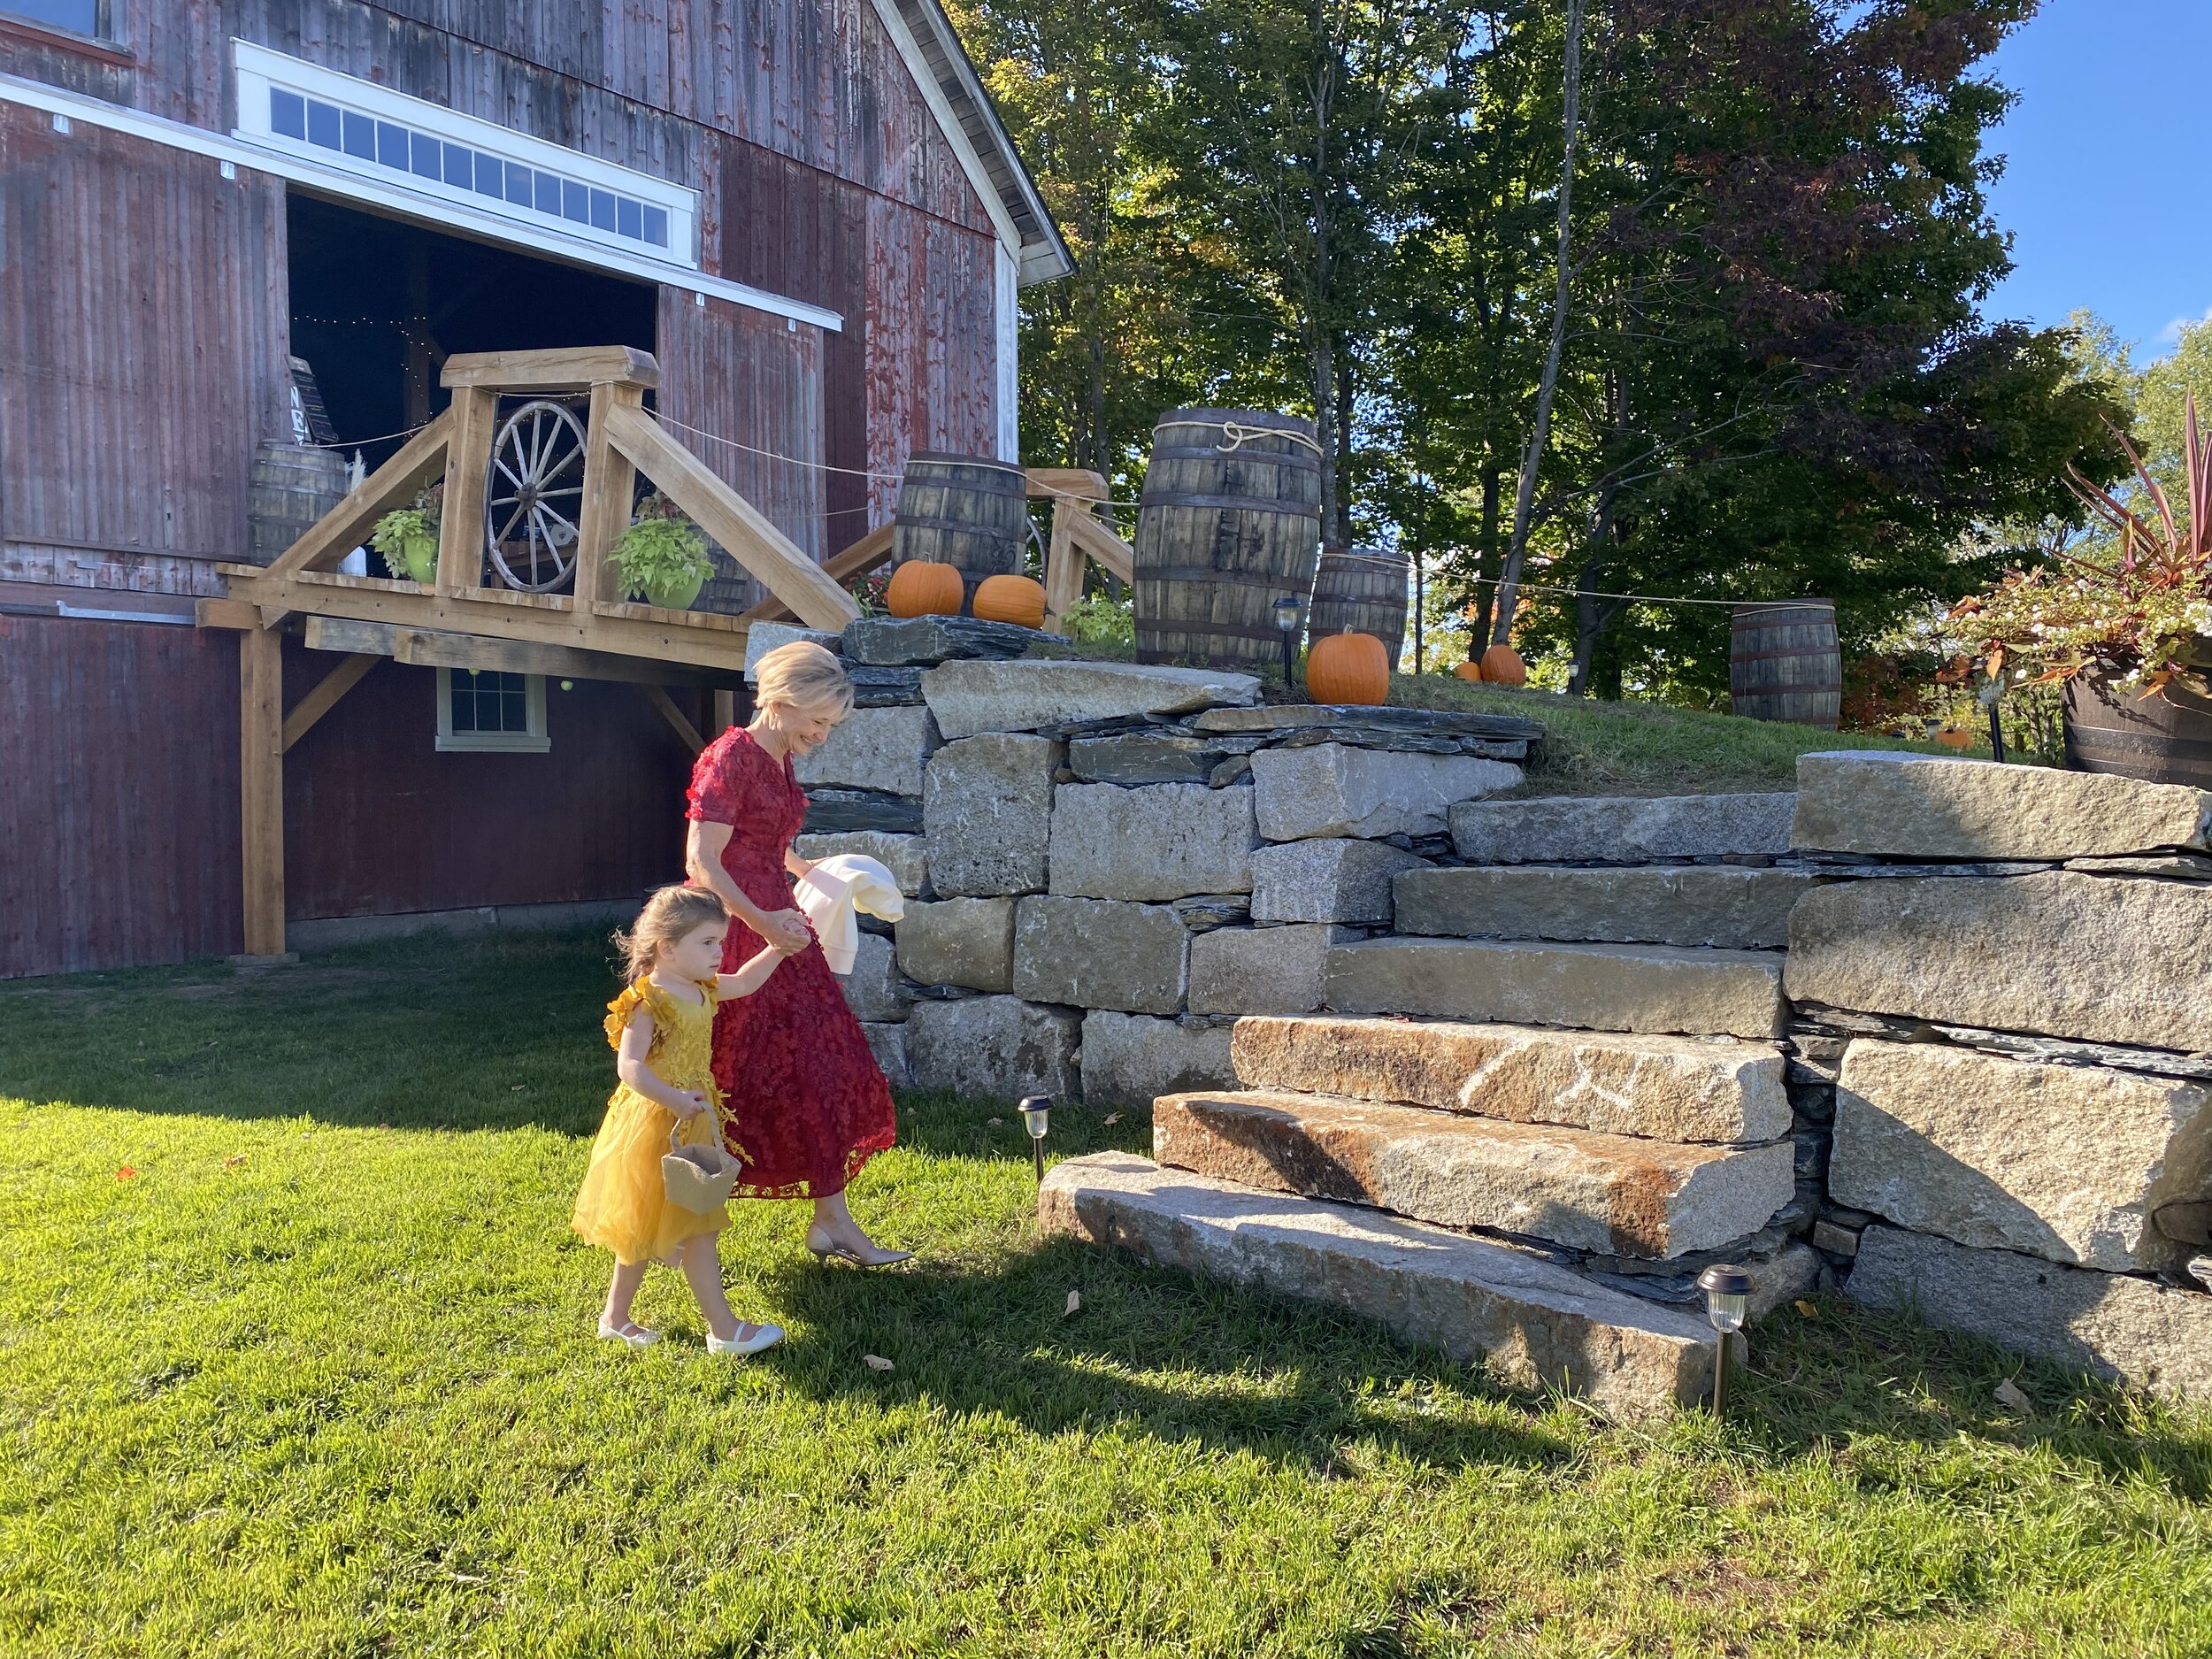 A woman and child dressed up walking up to a rustic barn with pumpkins placed outside